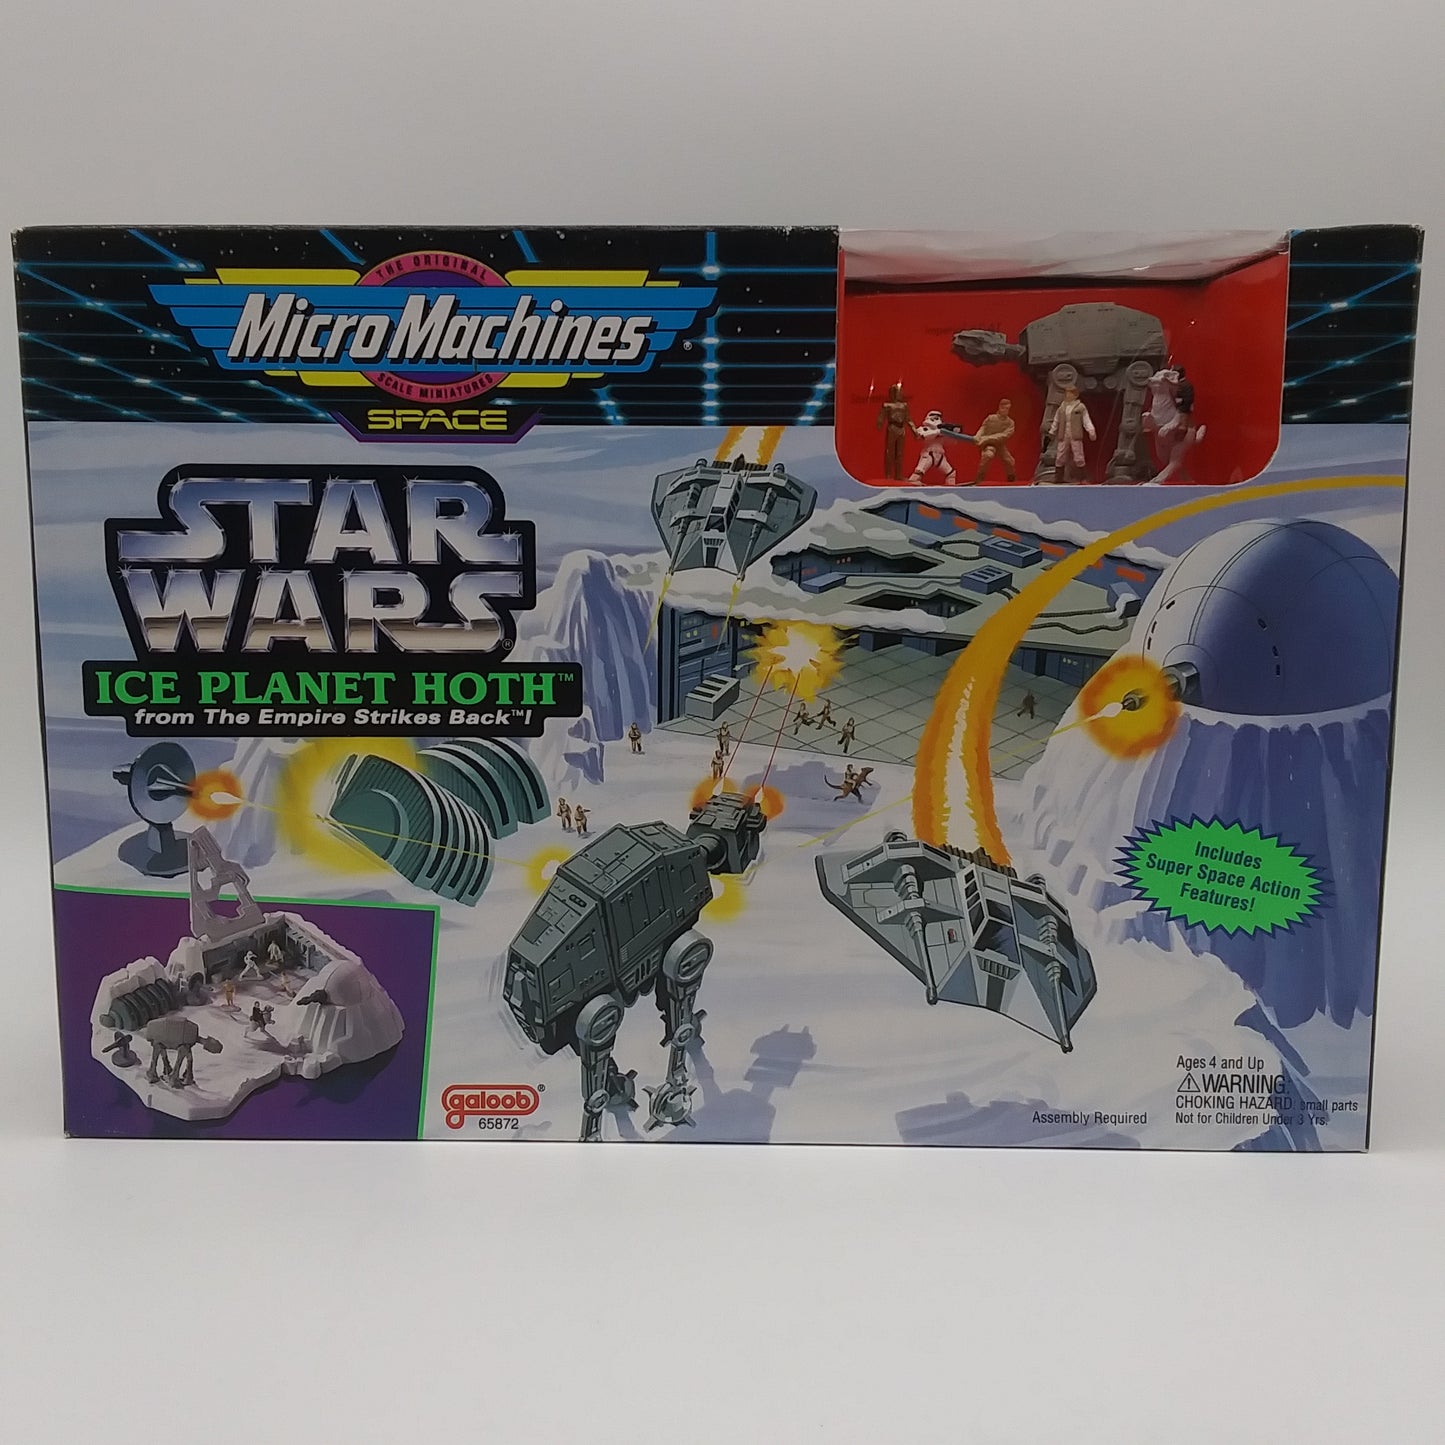 Micro Machines Star Wars Ice Planet Hoth